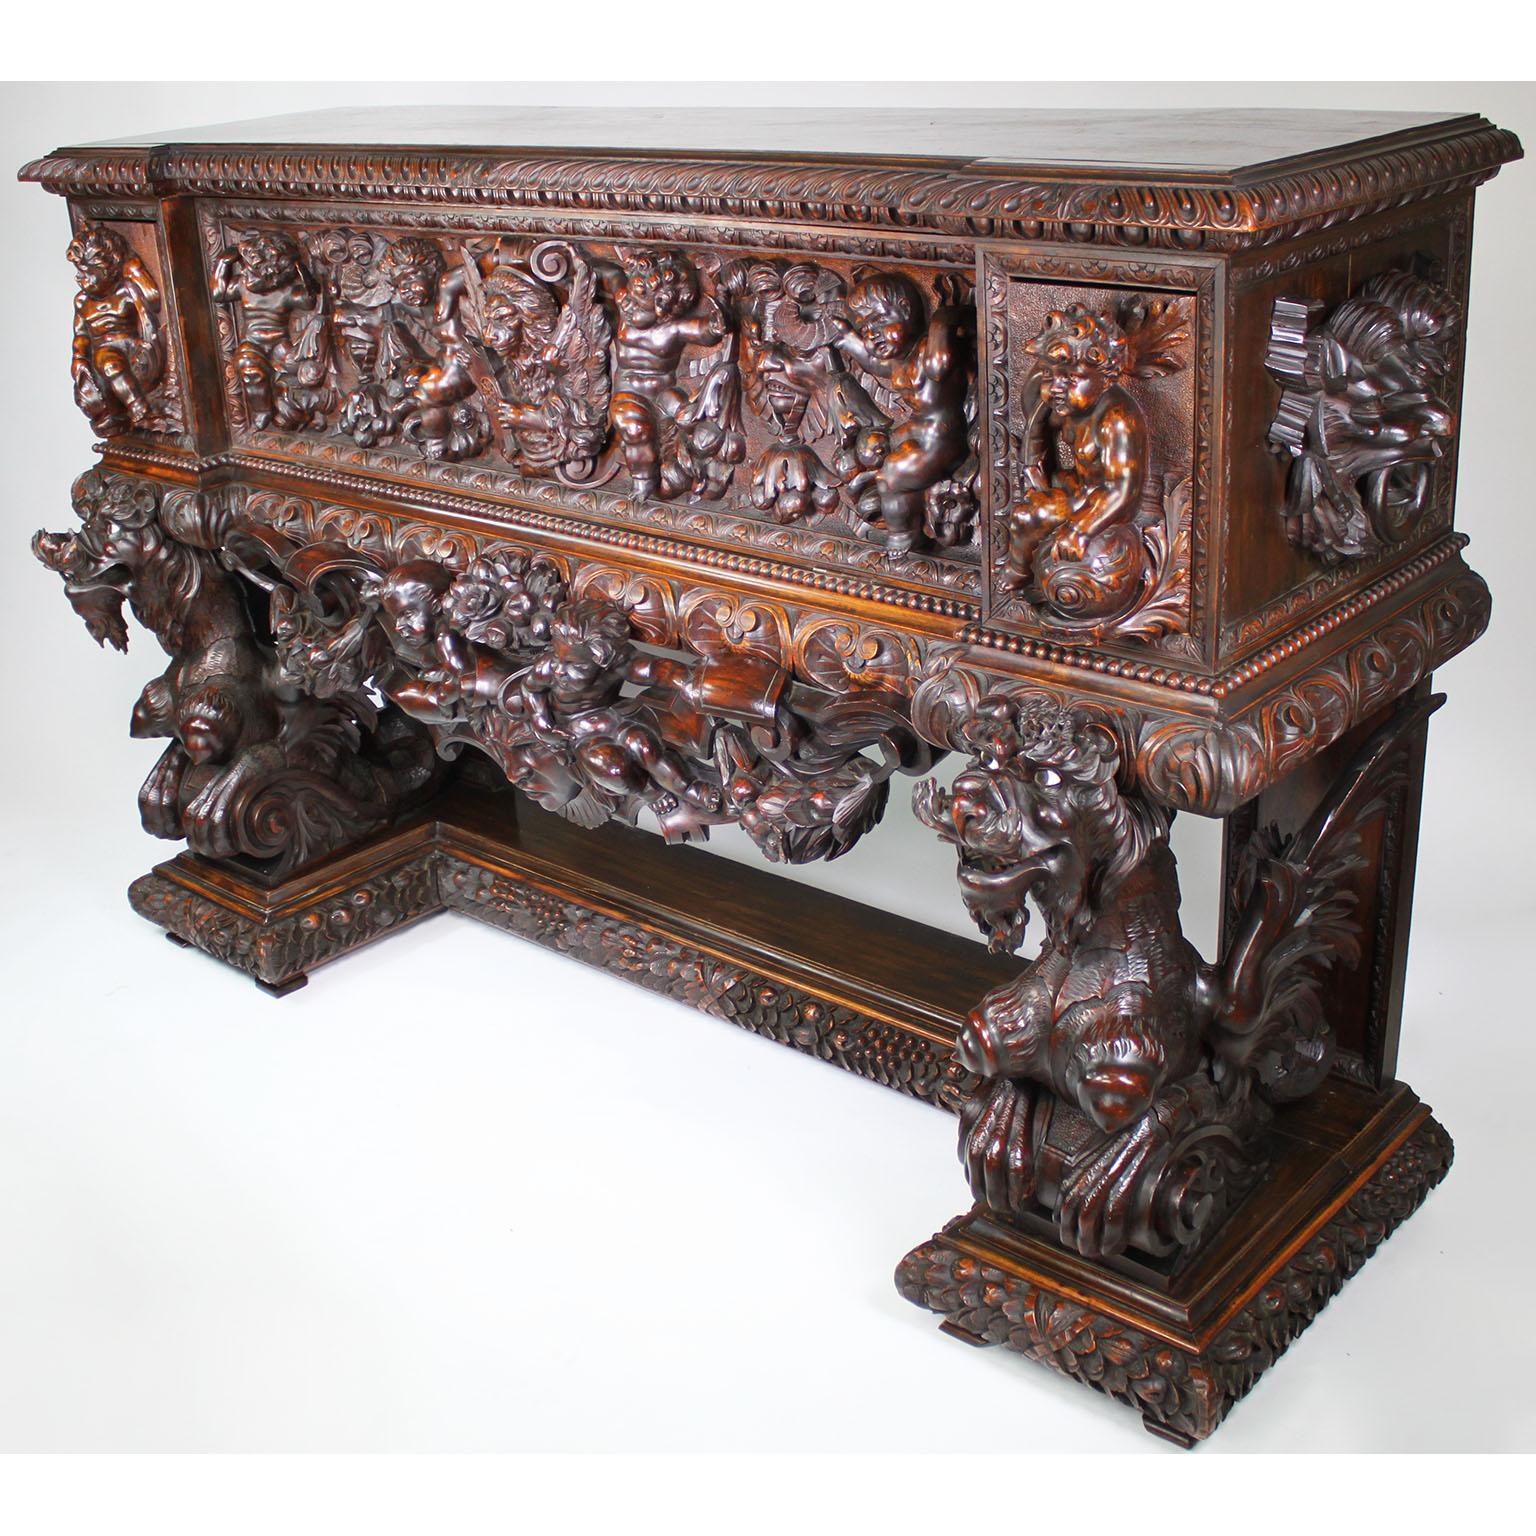 A Fine and Large Italian Florentine 19th Century Baroque Revival Style Carved Walnut Figural Cassone Chest on Stand. The ornately carved drop-front cassone with an allegorical in-relief carvings depicting playful Putti among satyrs, fruits and